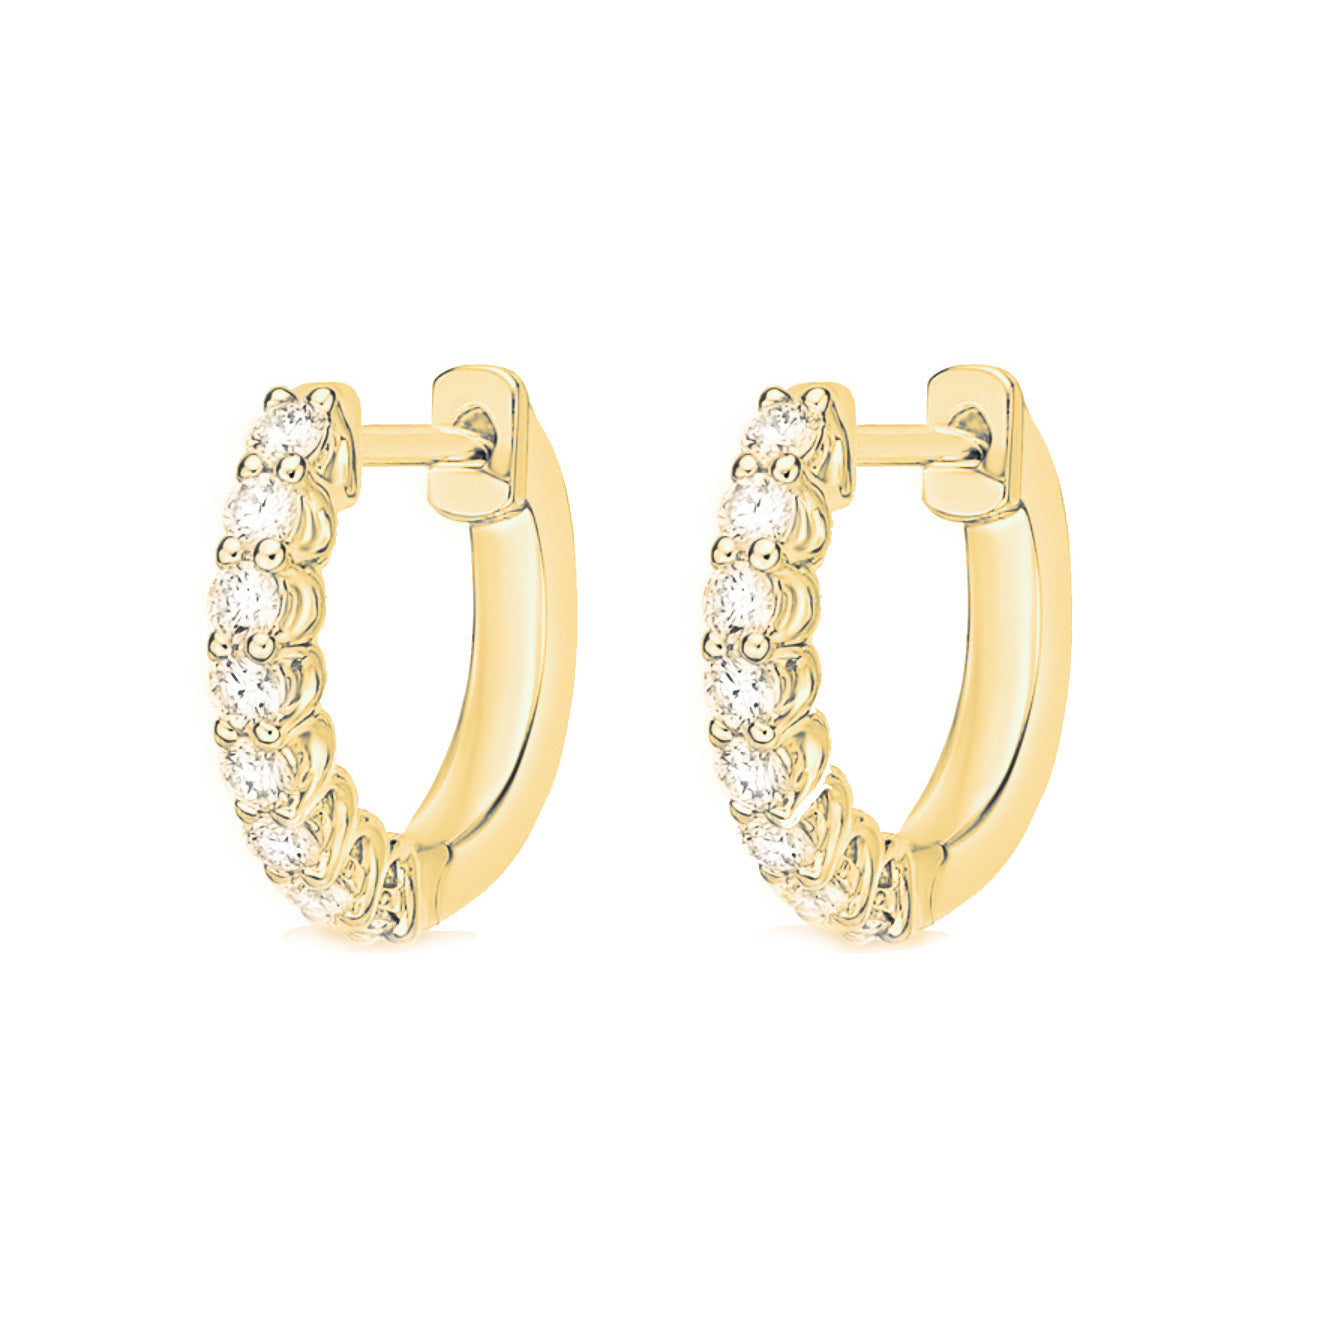 Round Brilliant Cut Diamond Huggie Hoops with Woven Gallery - 12mm